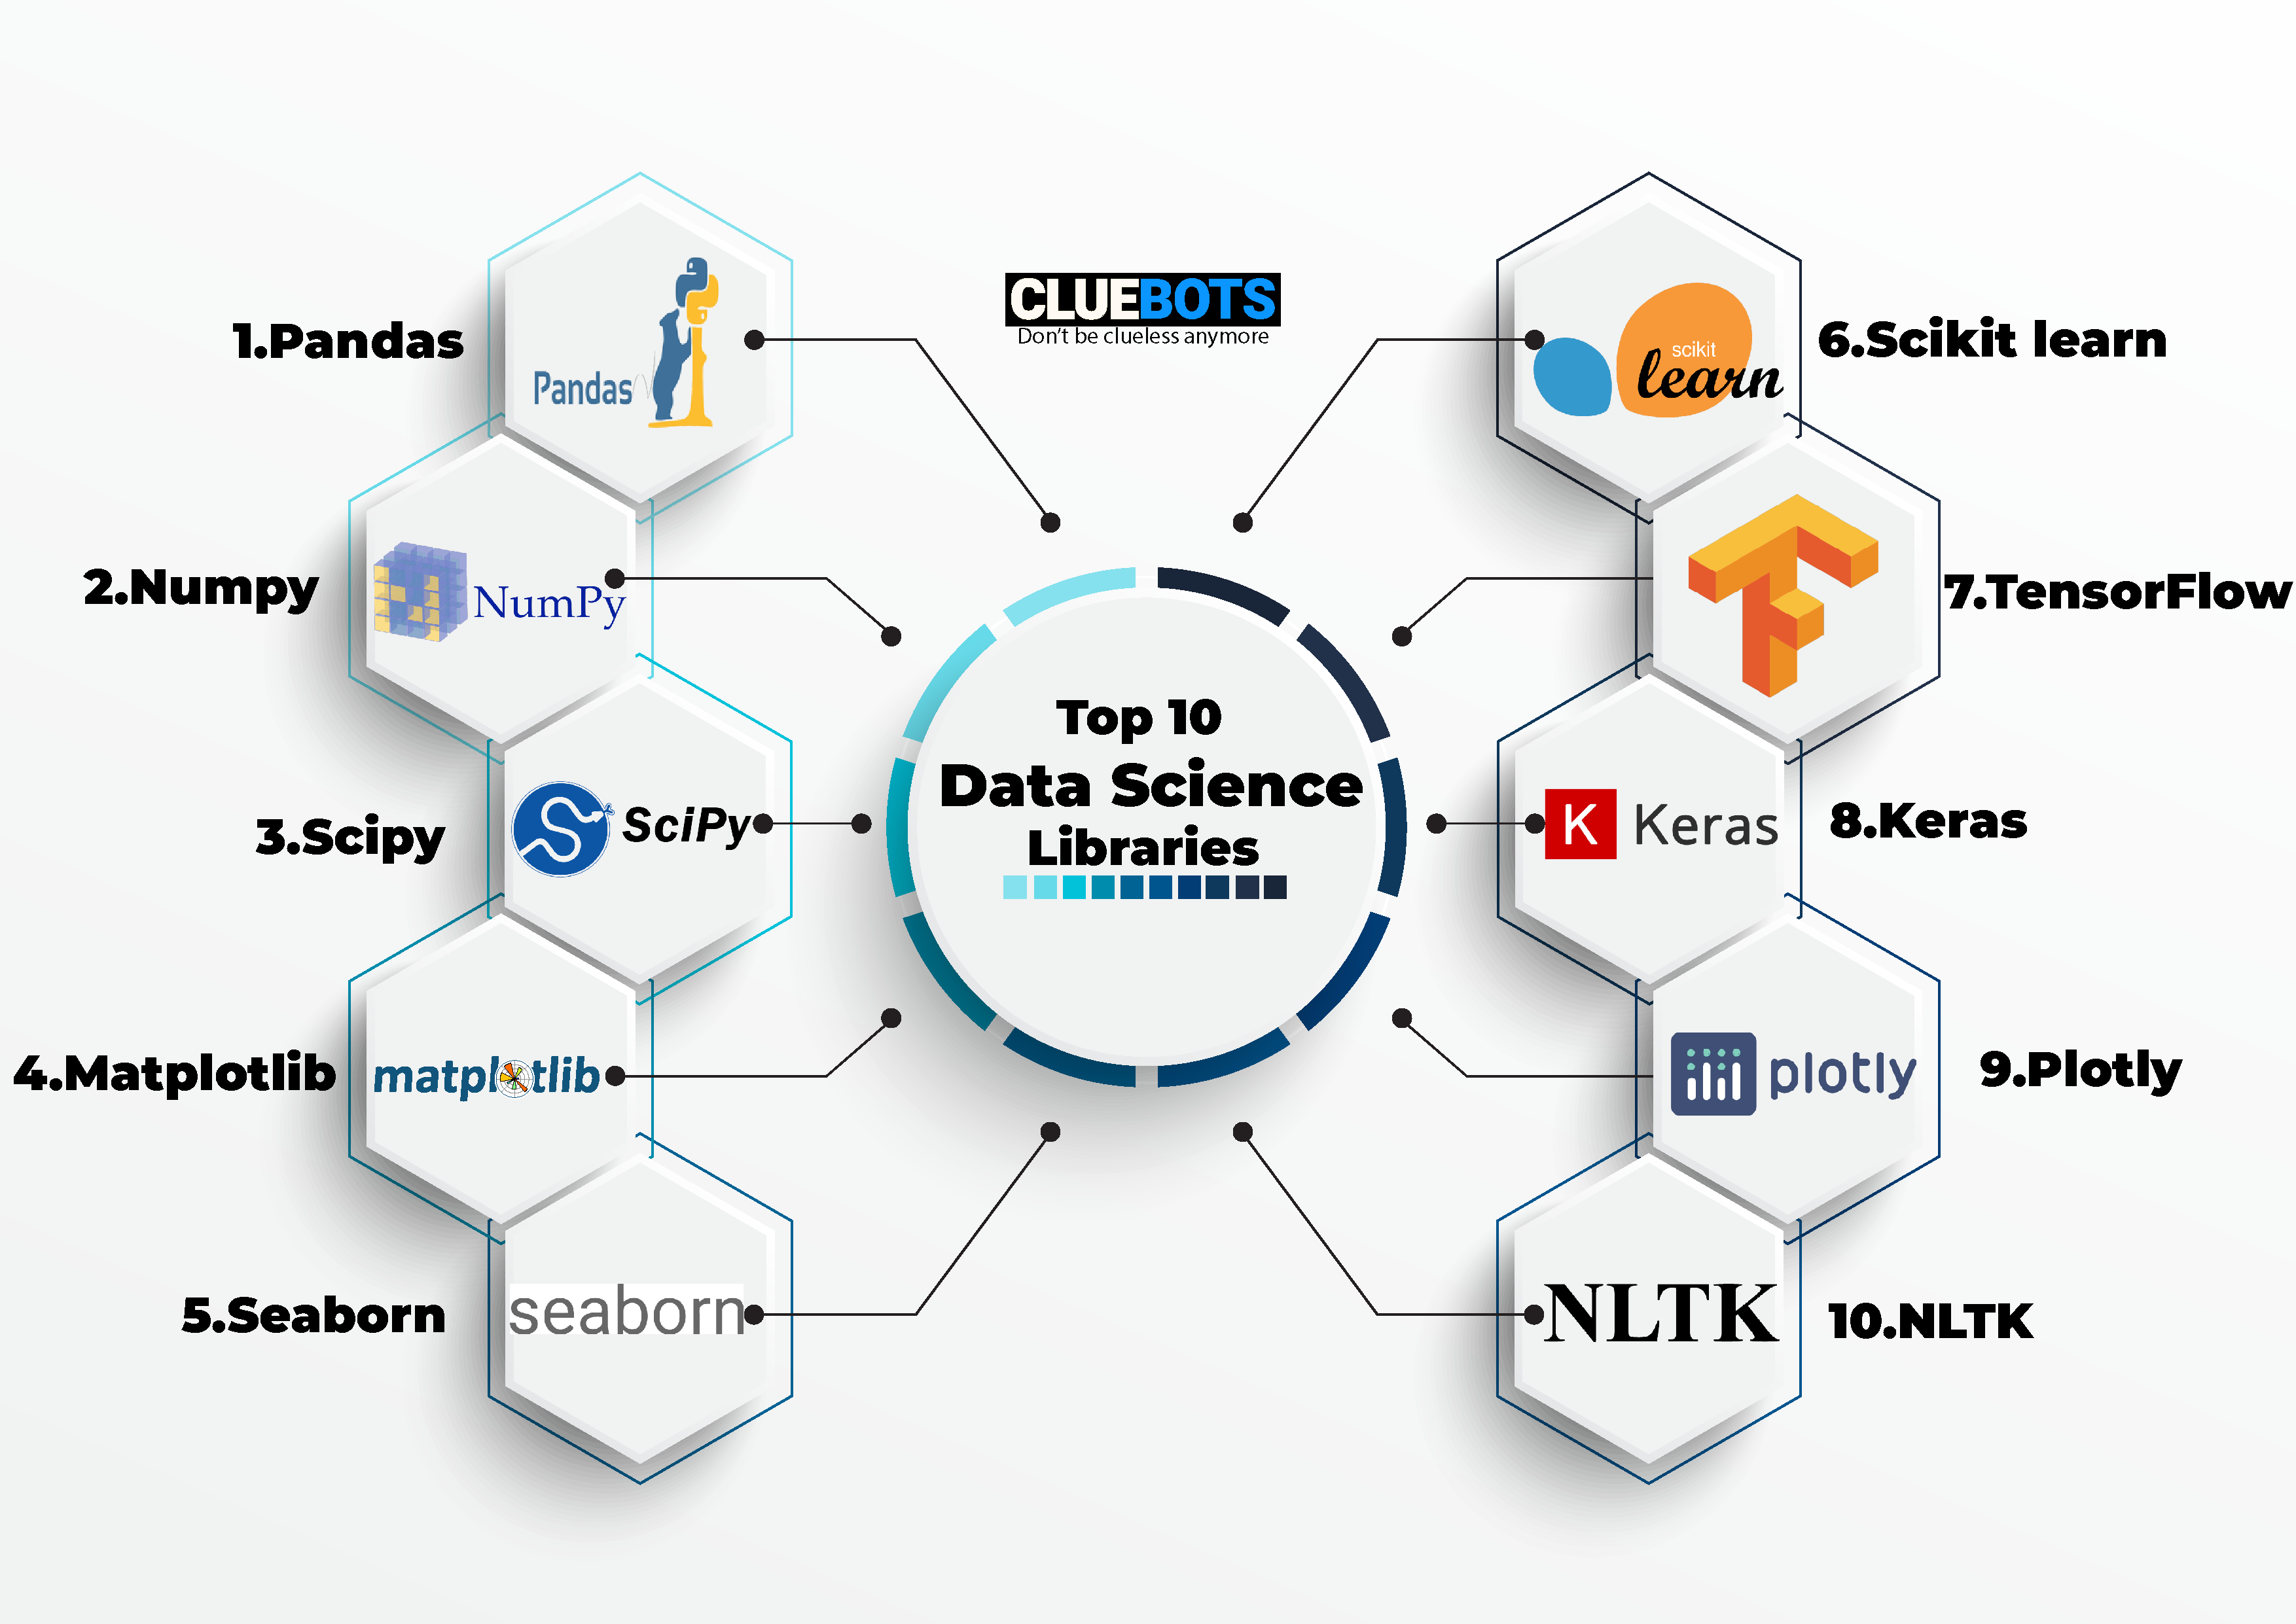 Top 10 Data Science Libraries